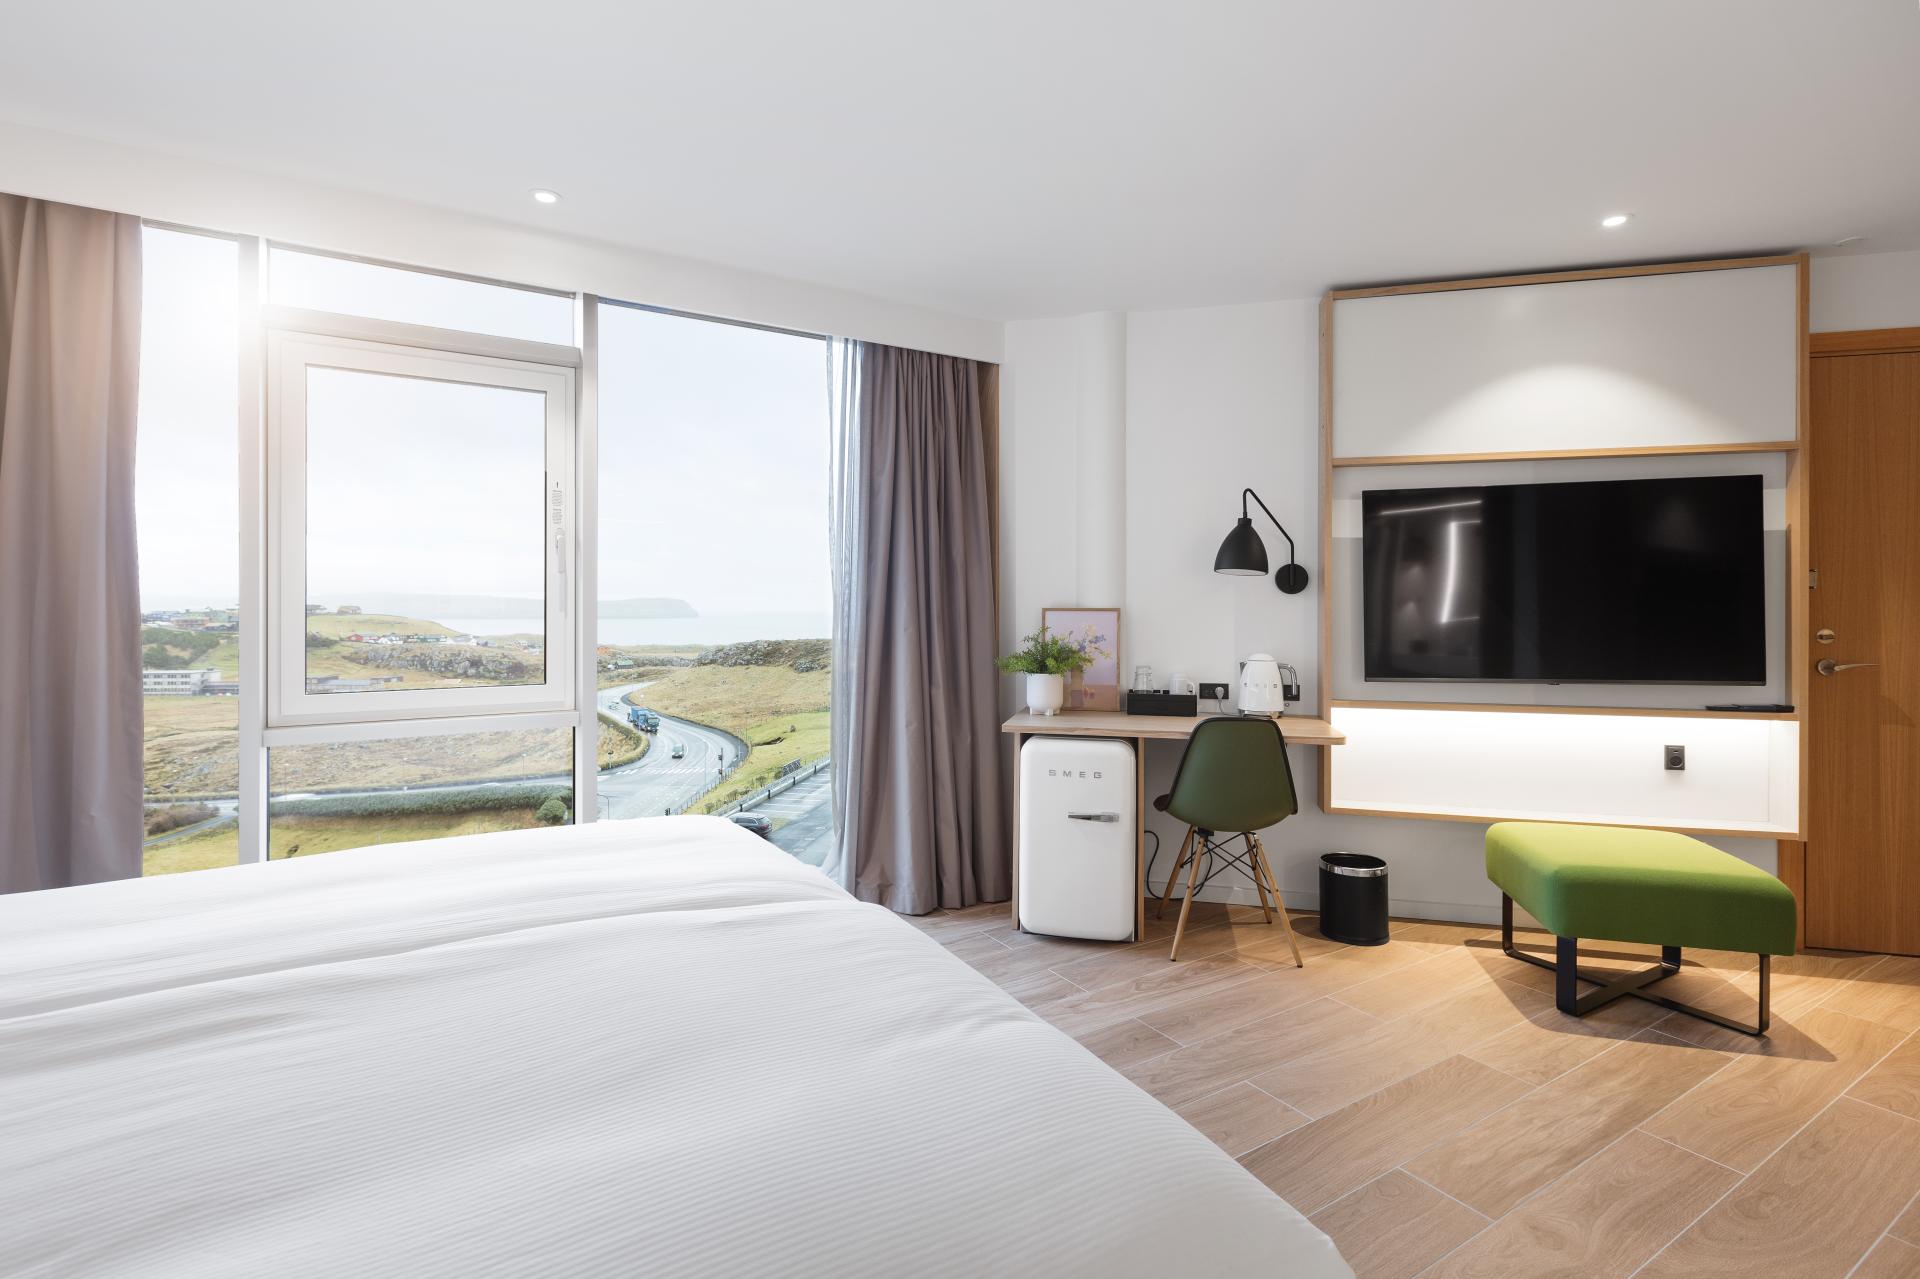 Thumbnail of - Hotel Hilton Garden Inn, a beautiful view out of the green landscape in the Faroe Islands